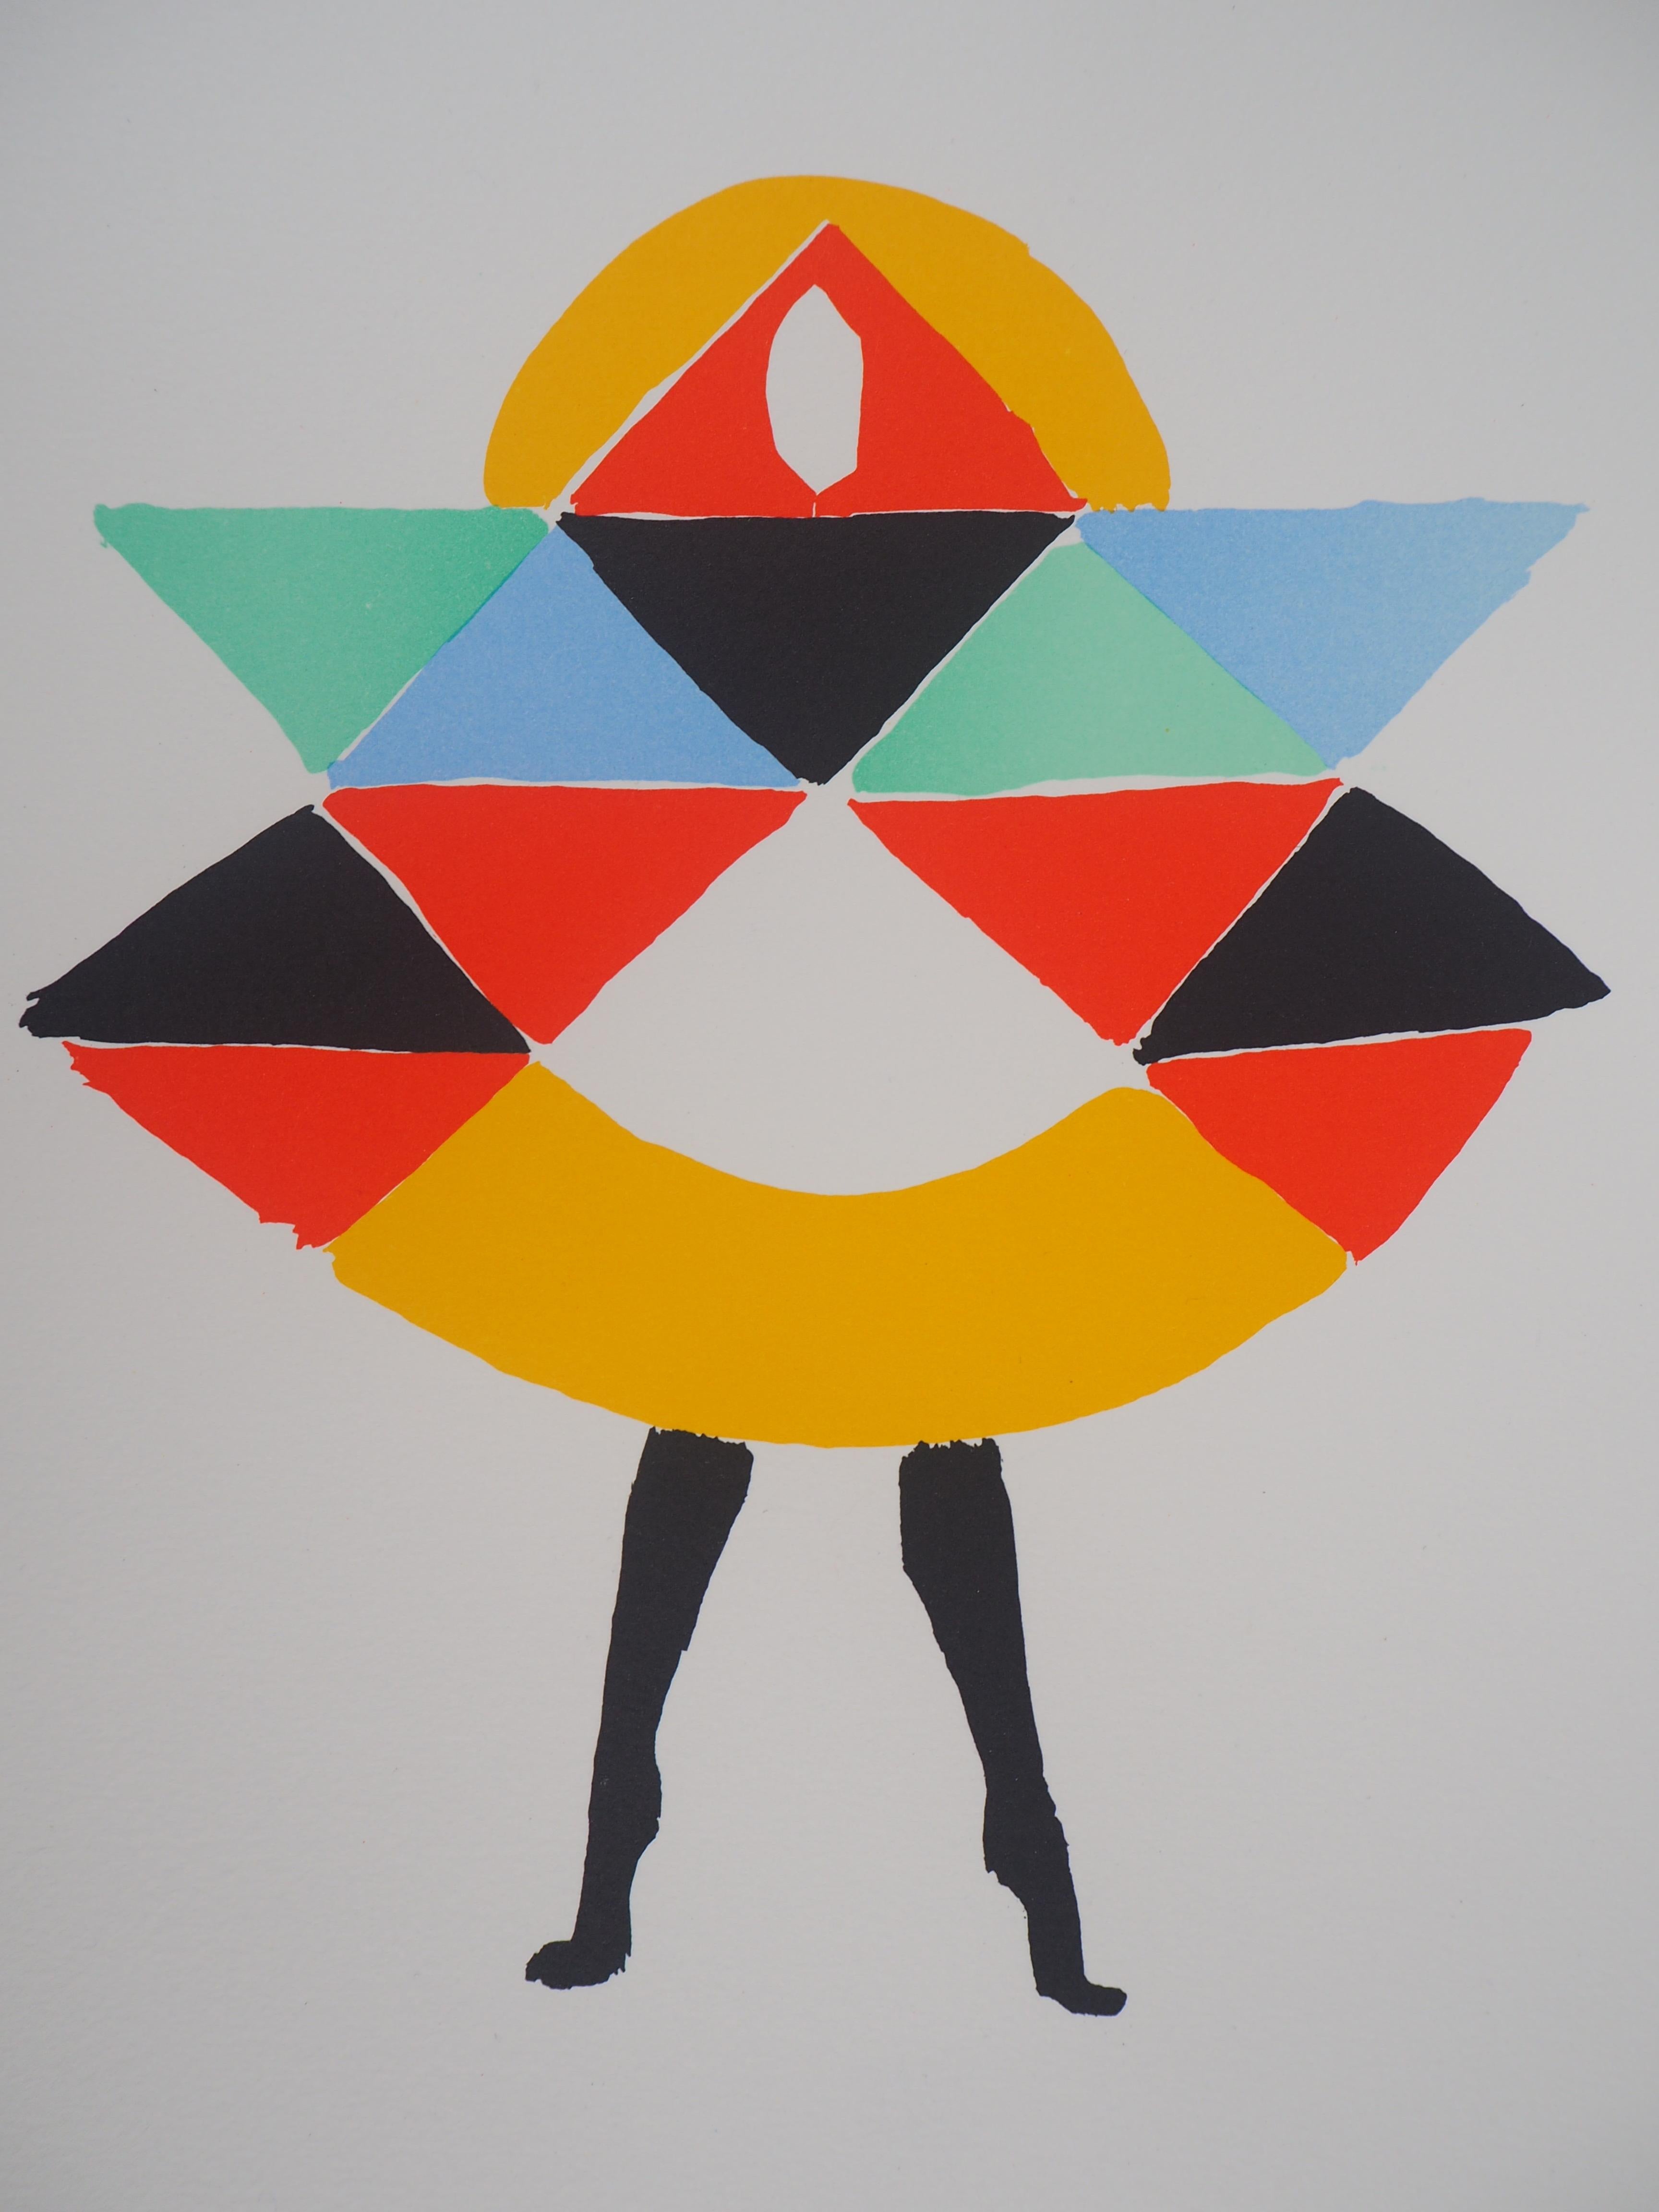 Sonia DELAUNAY
Carnival Dress

Lithograph after a painting
Printed signature in the plate
Numbered /600 
On Arches vellum 40 x 30 cm (c. 15.7 x 11.8 in)
ArtCurial edition, 1994

Excellent condition